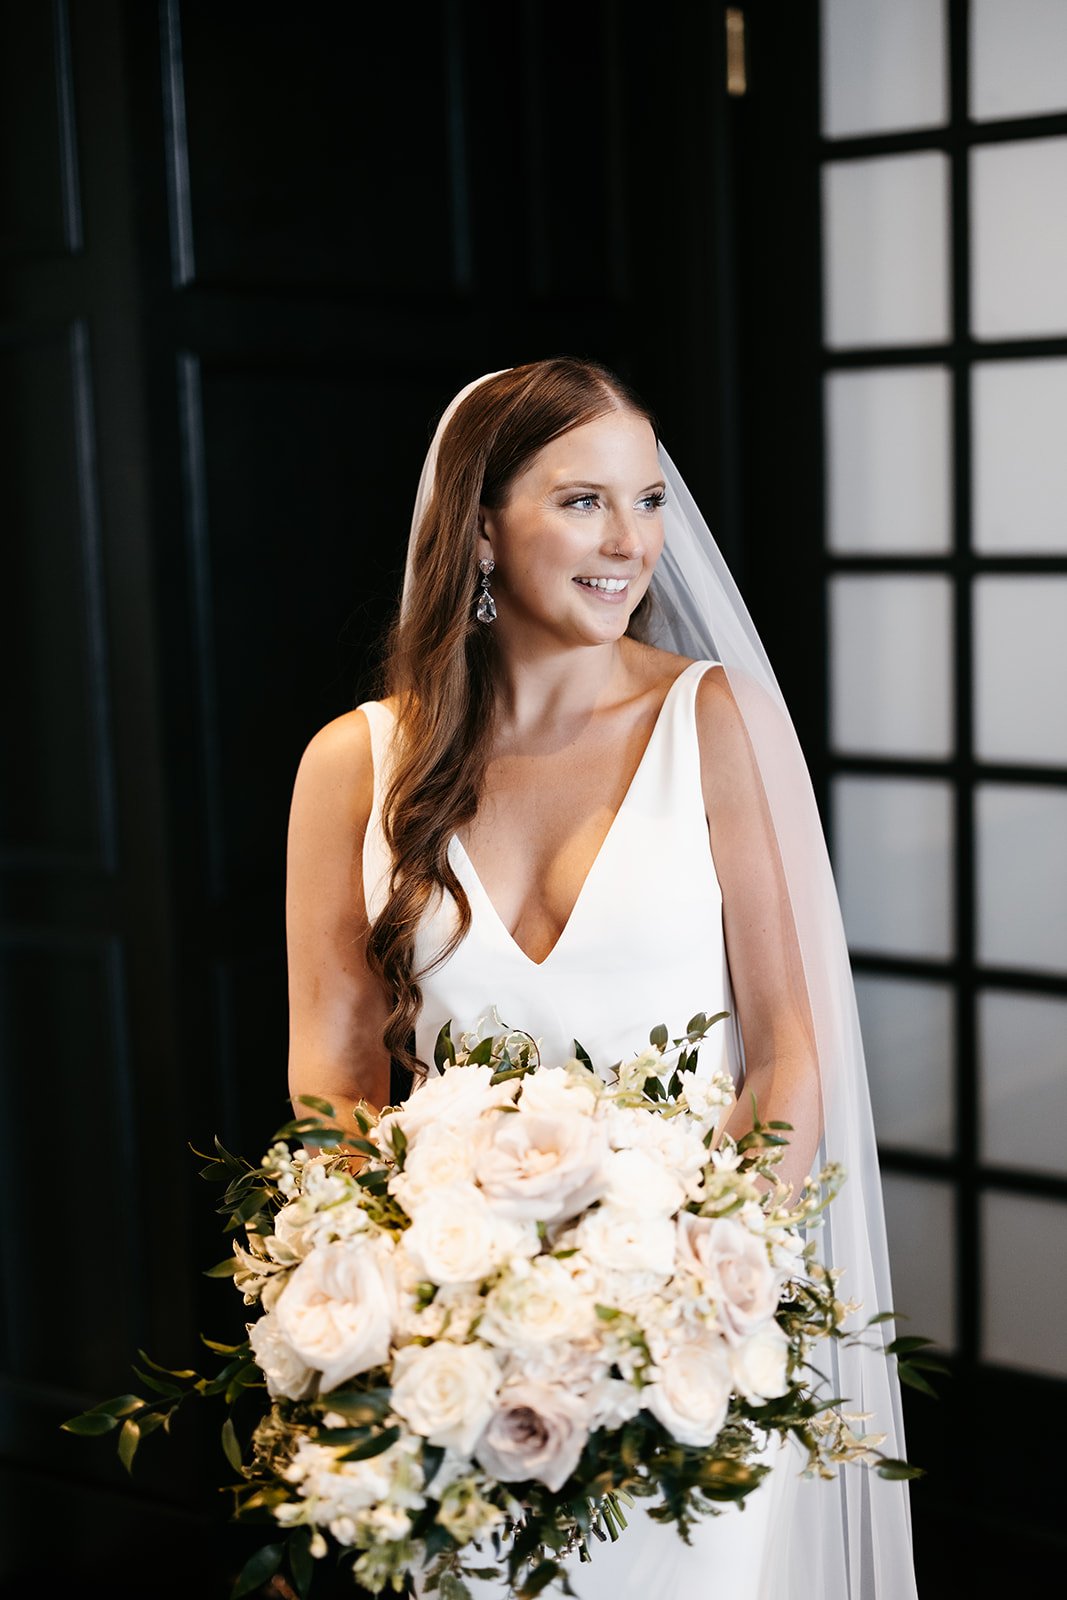 Savannah-bride-casey-in-archie-by-made-with-love-a-sleek-modern-slip-dress-purchased-from-savannah-bridal-shop-ivory-and-beau-1.jpg